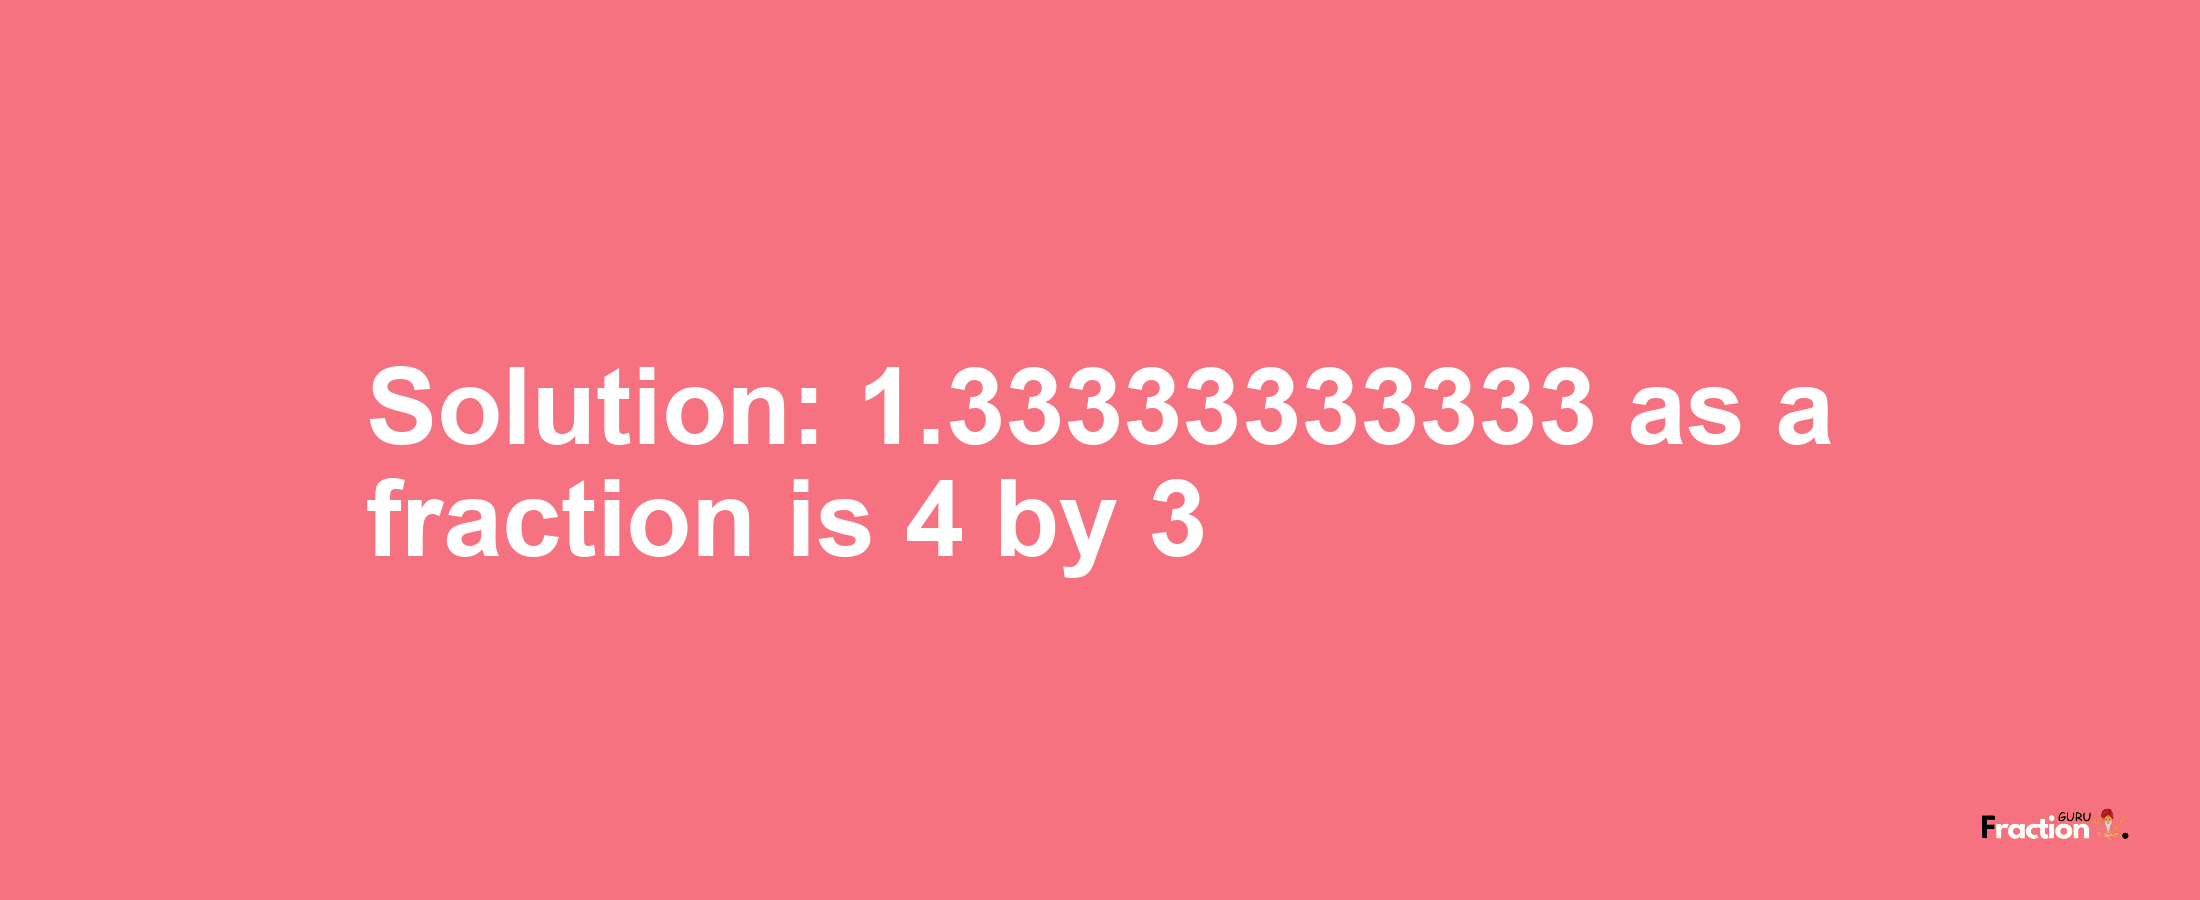 Solution:1.33333333333 as a fraction is 4/3